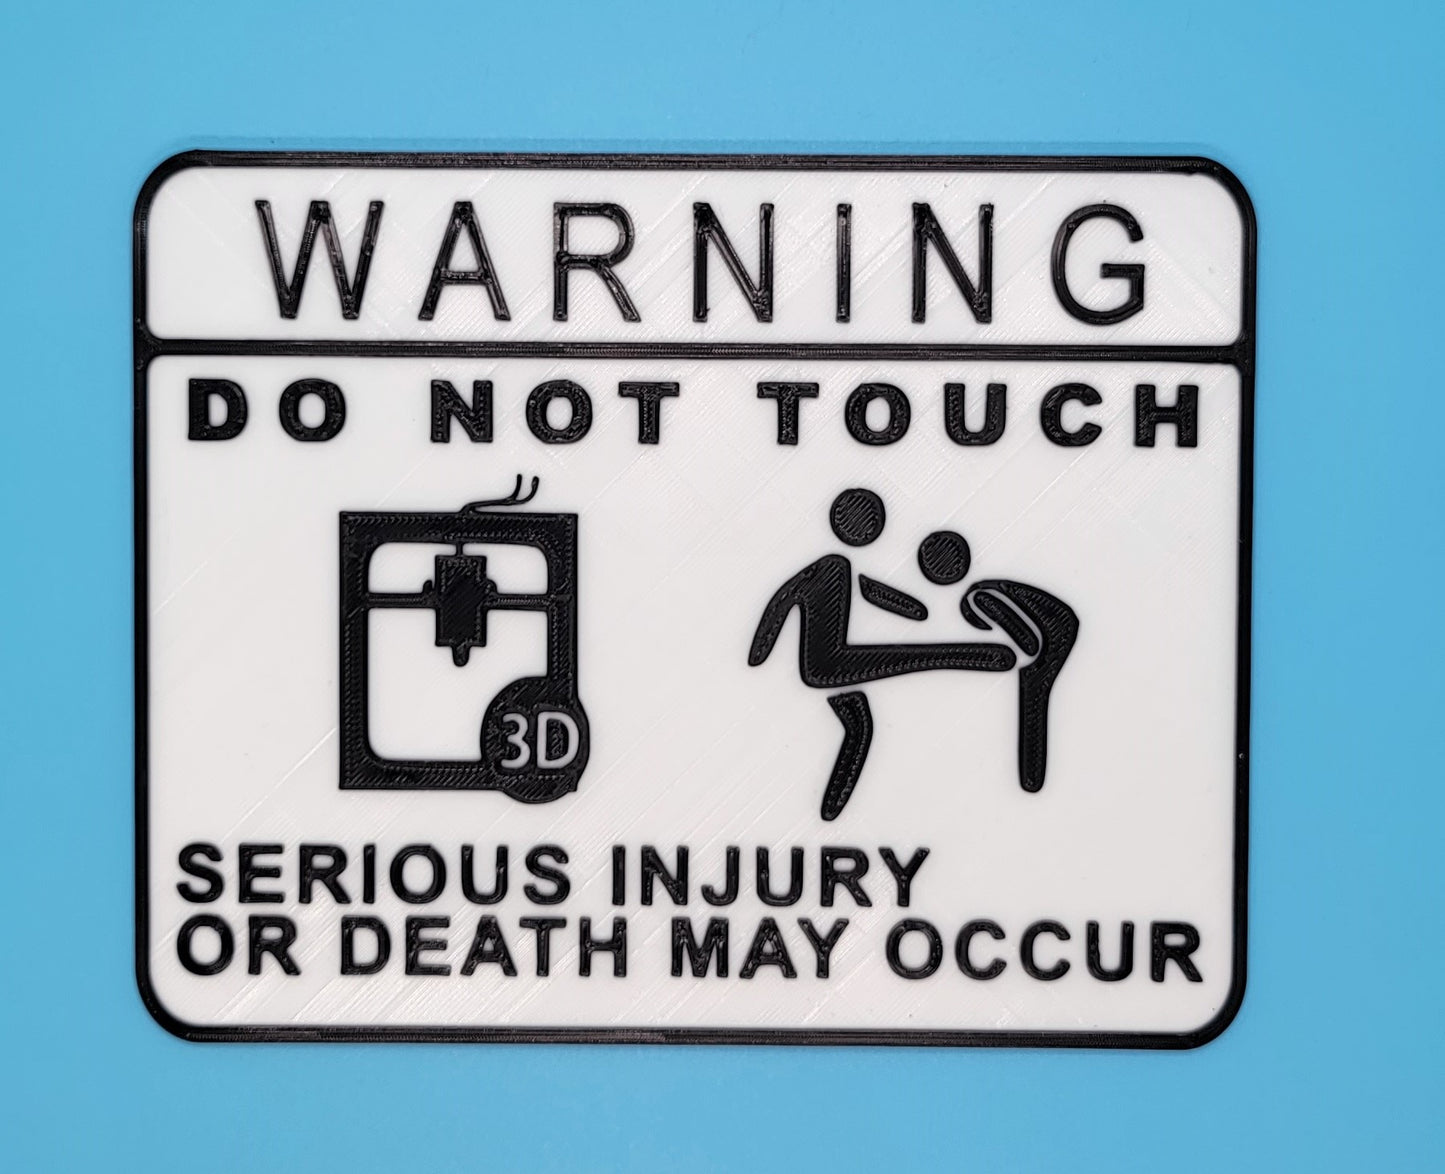 Warning!! "DO NOT TOUCH" - 3D printed sign